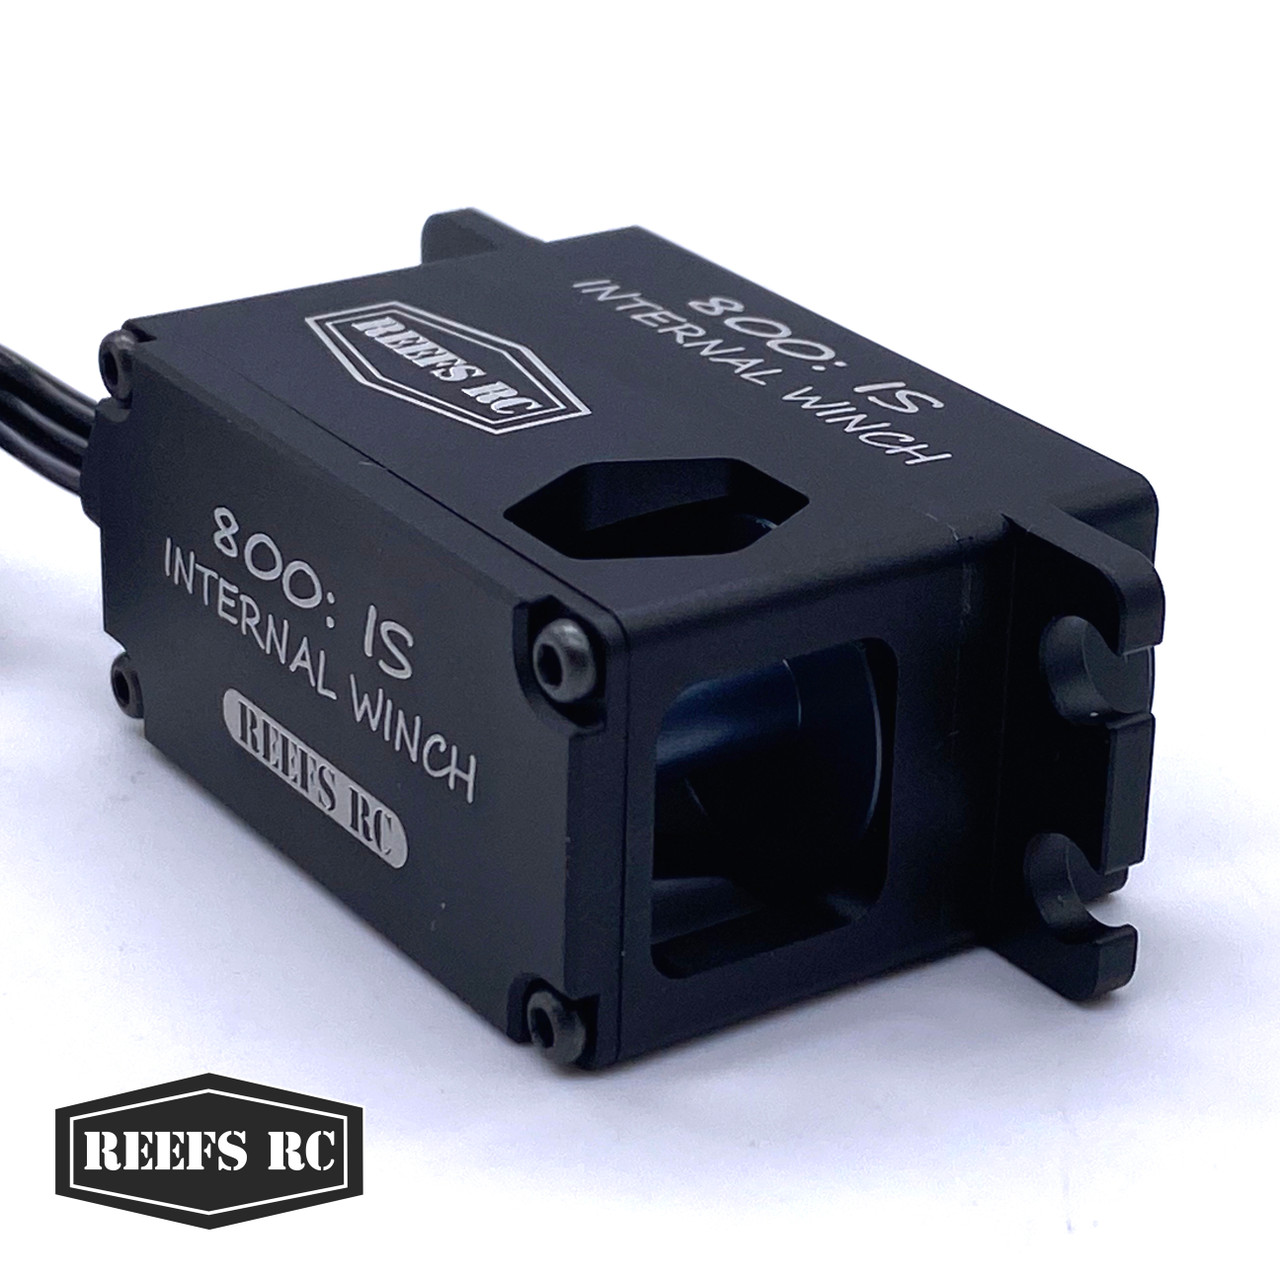 Reefs RC 800 IS Internal Spool Low Pro High Torque High Speed Brushless Servo w/ Built in Winch Controller